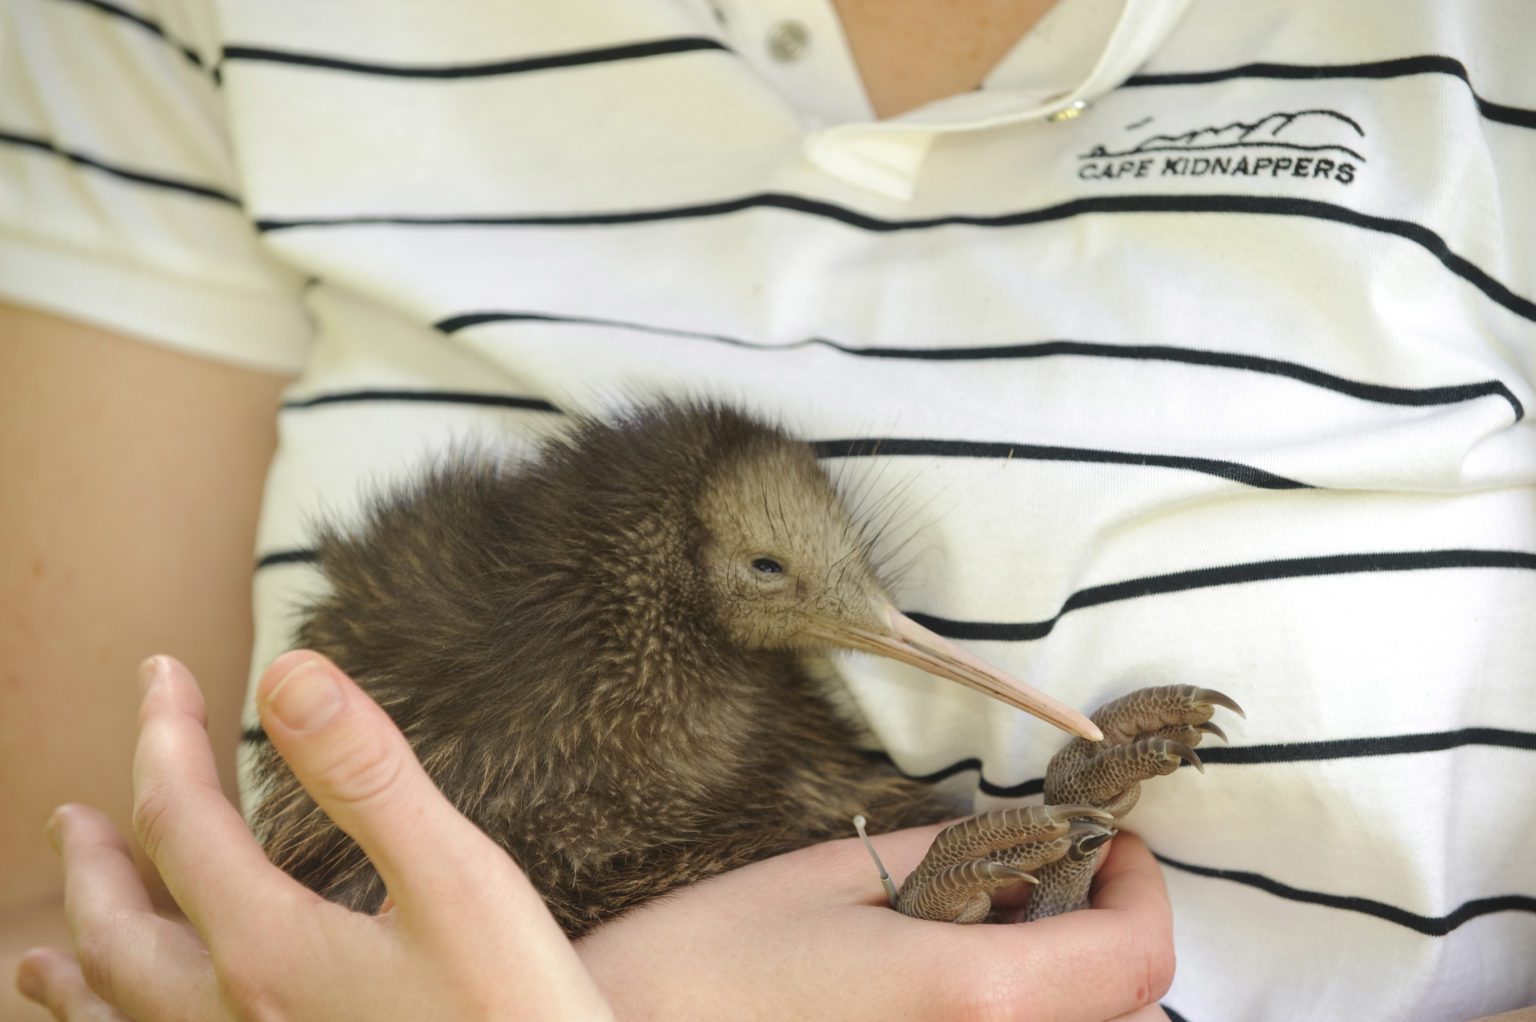 A kiwi bird being held at the kiwi sanctuary at Cape Kidnappers